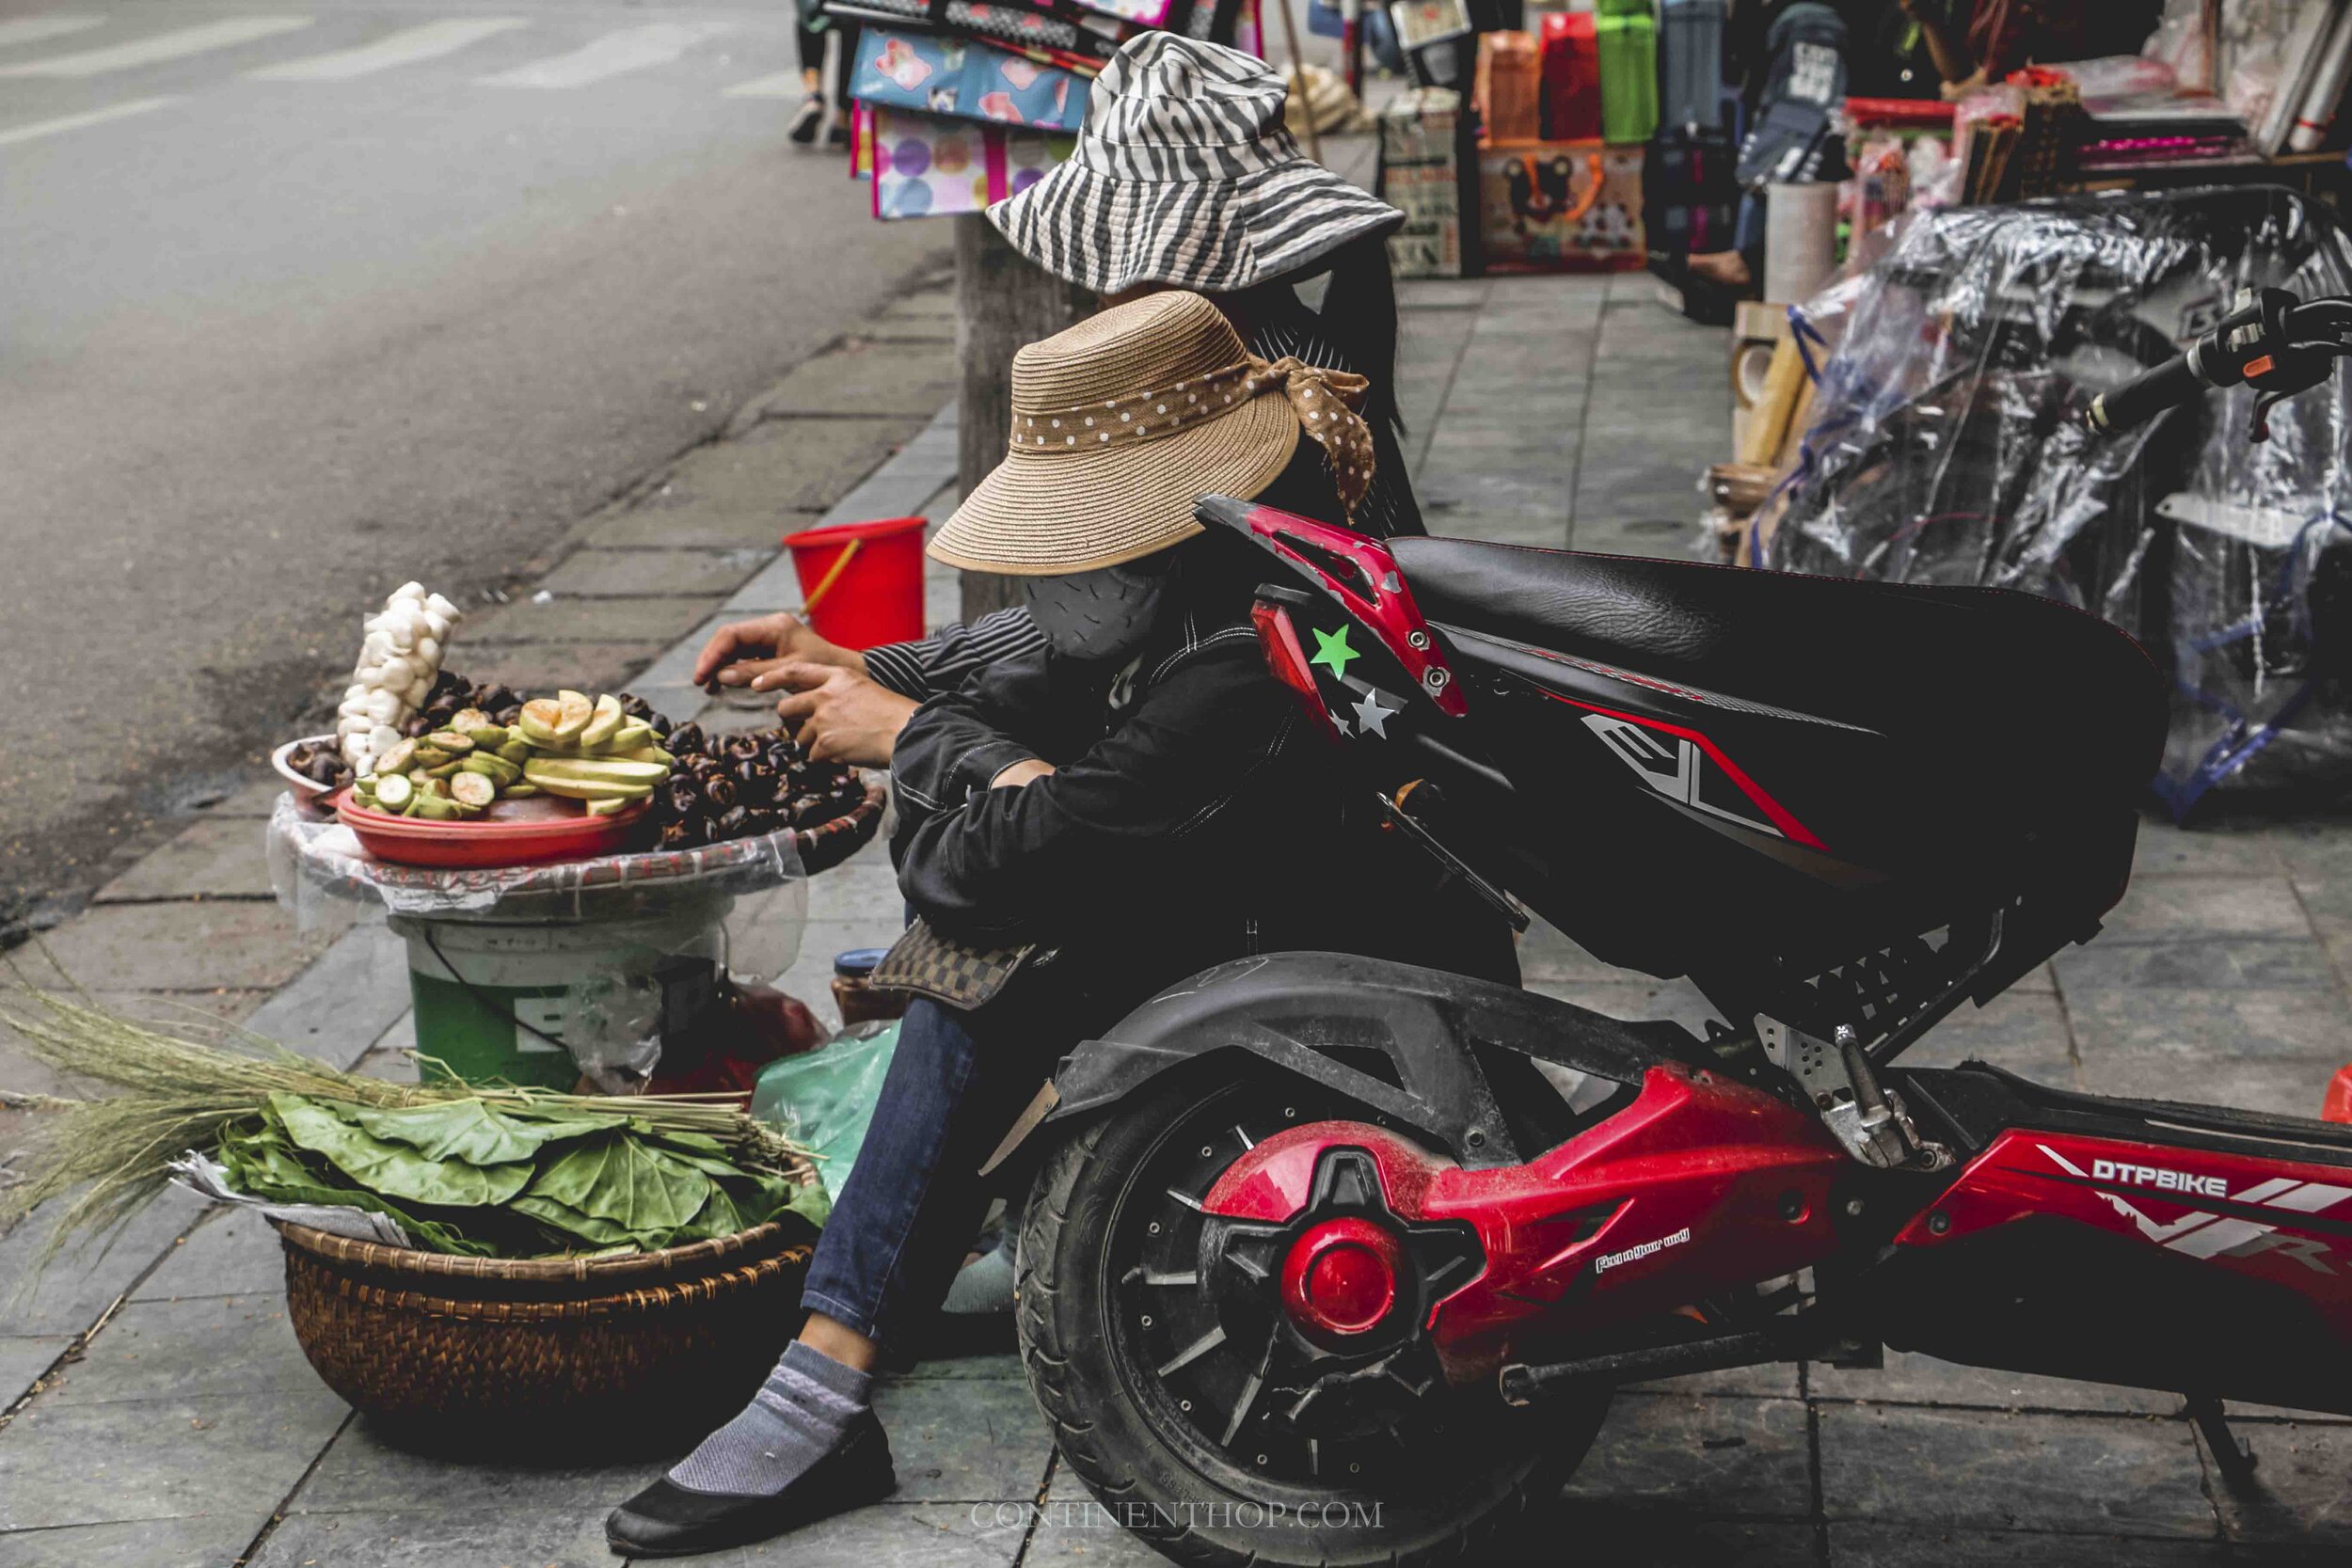 Woman sat next to a motorbike on the road selling local fruits in Hanoi